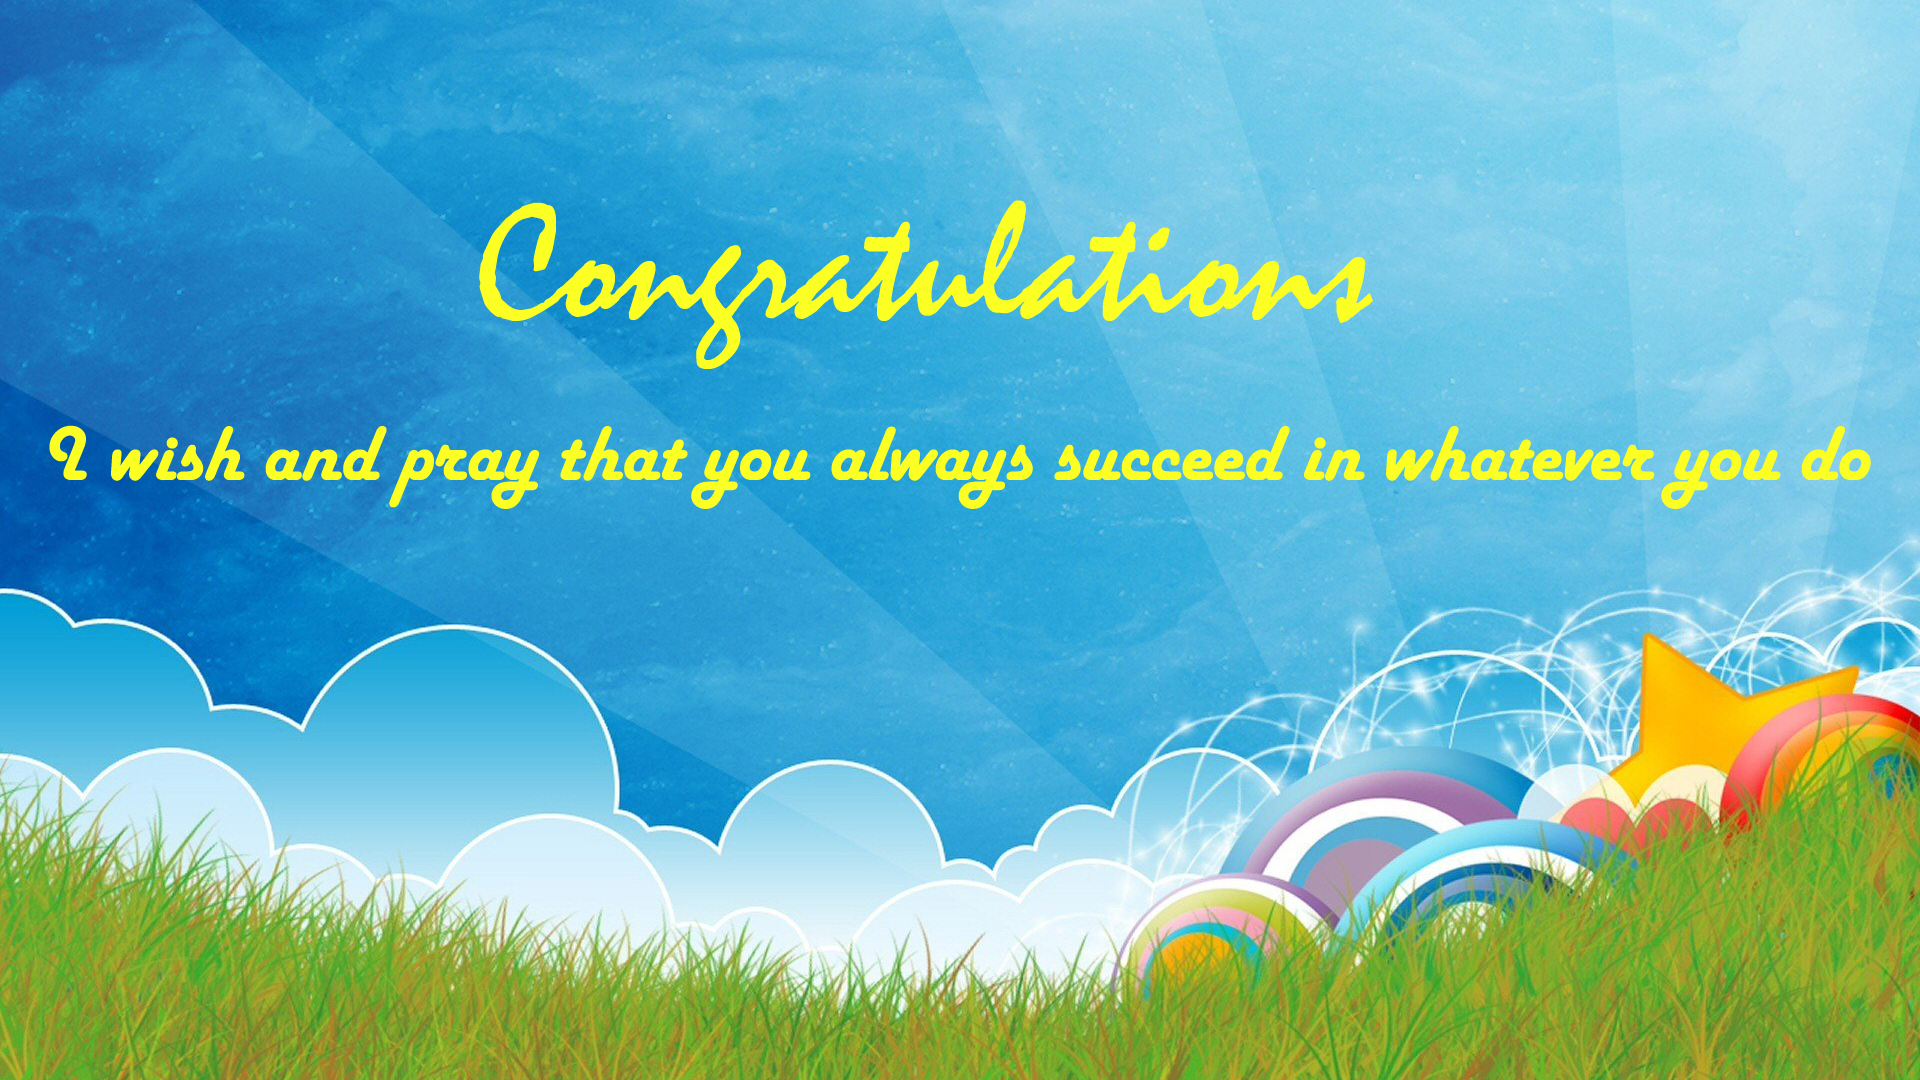 Congratulation Images Free With Quotes Hd Wallpapers Wallpapers